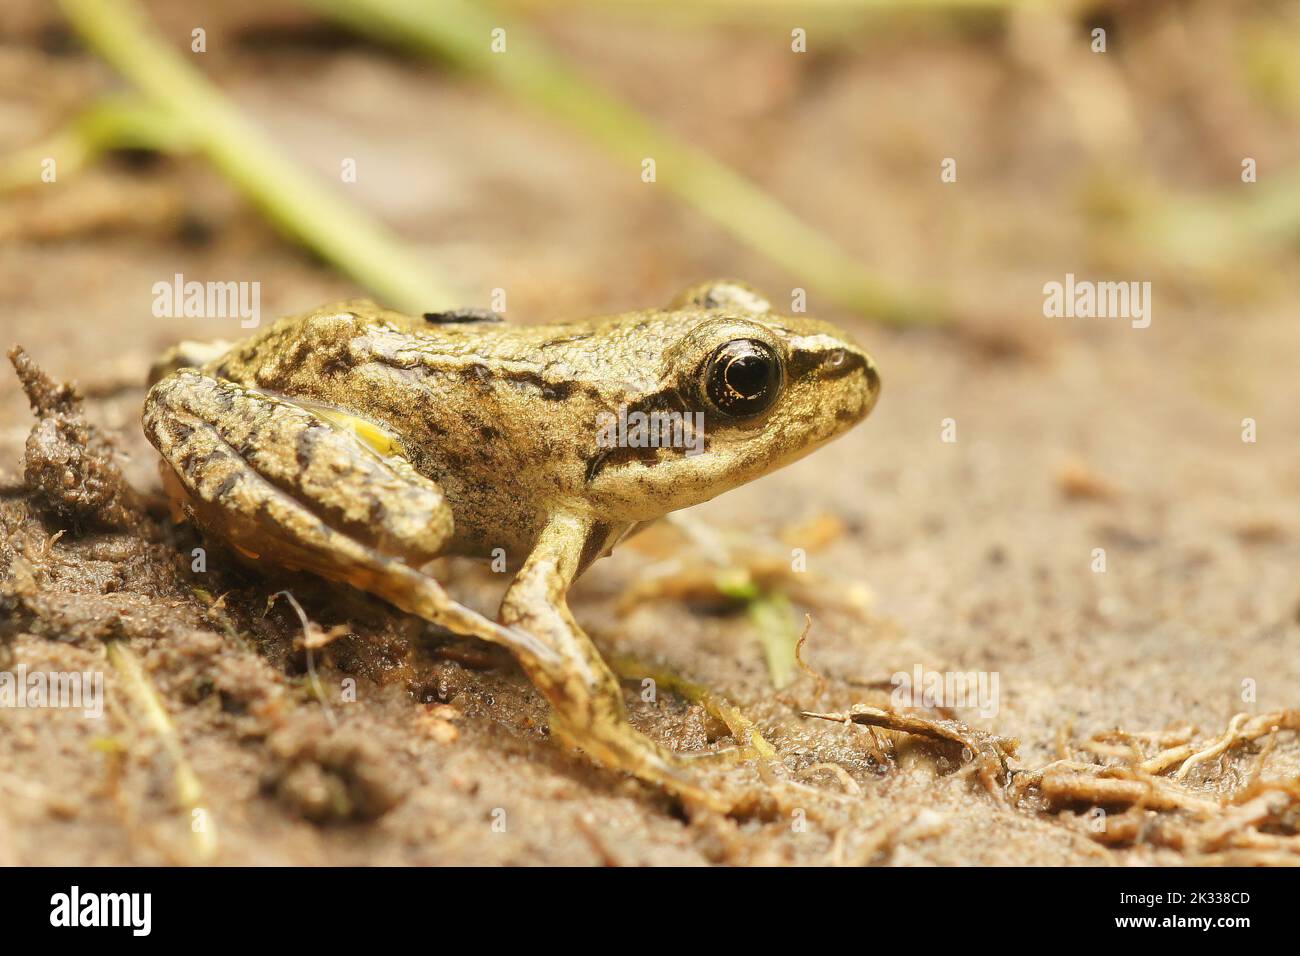 Closeup on small just metamorphosed froglet of hte Common European brown frog ,Rana temporaria Stock Photo